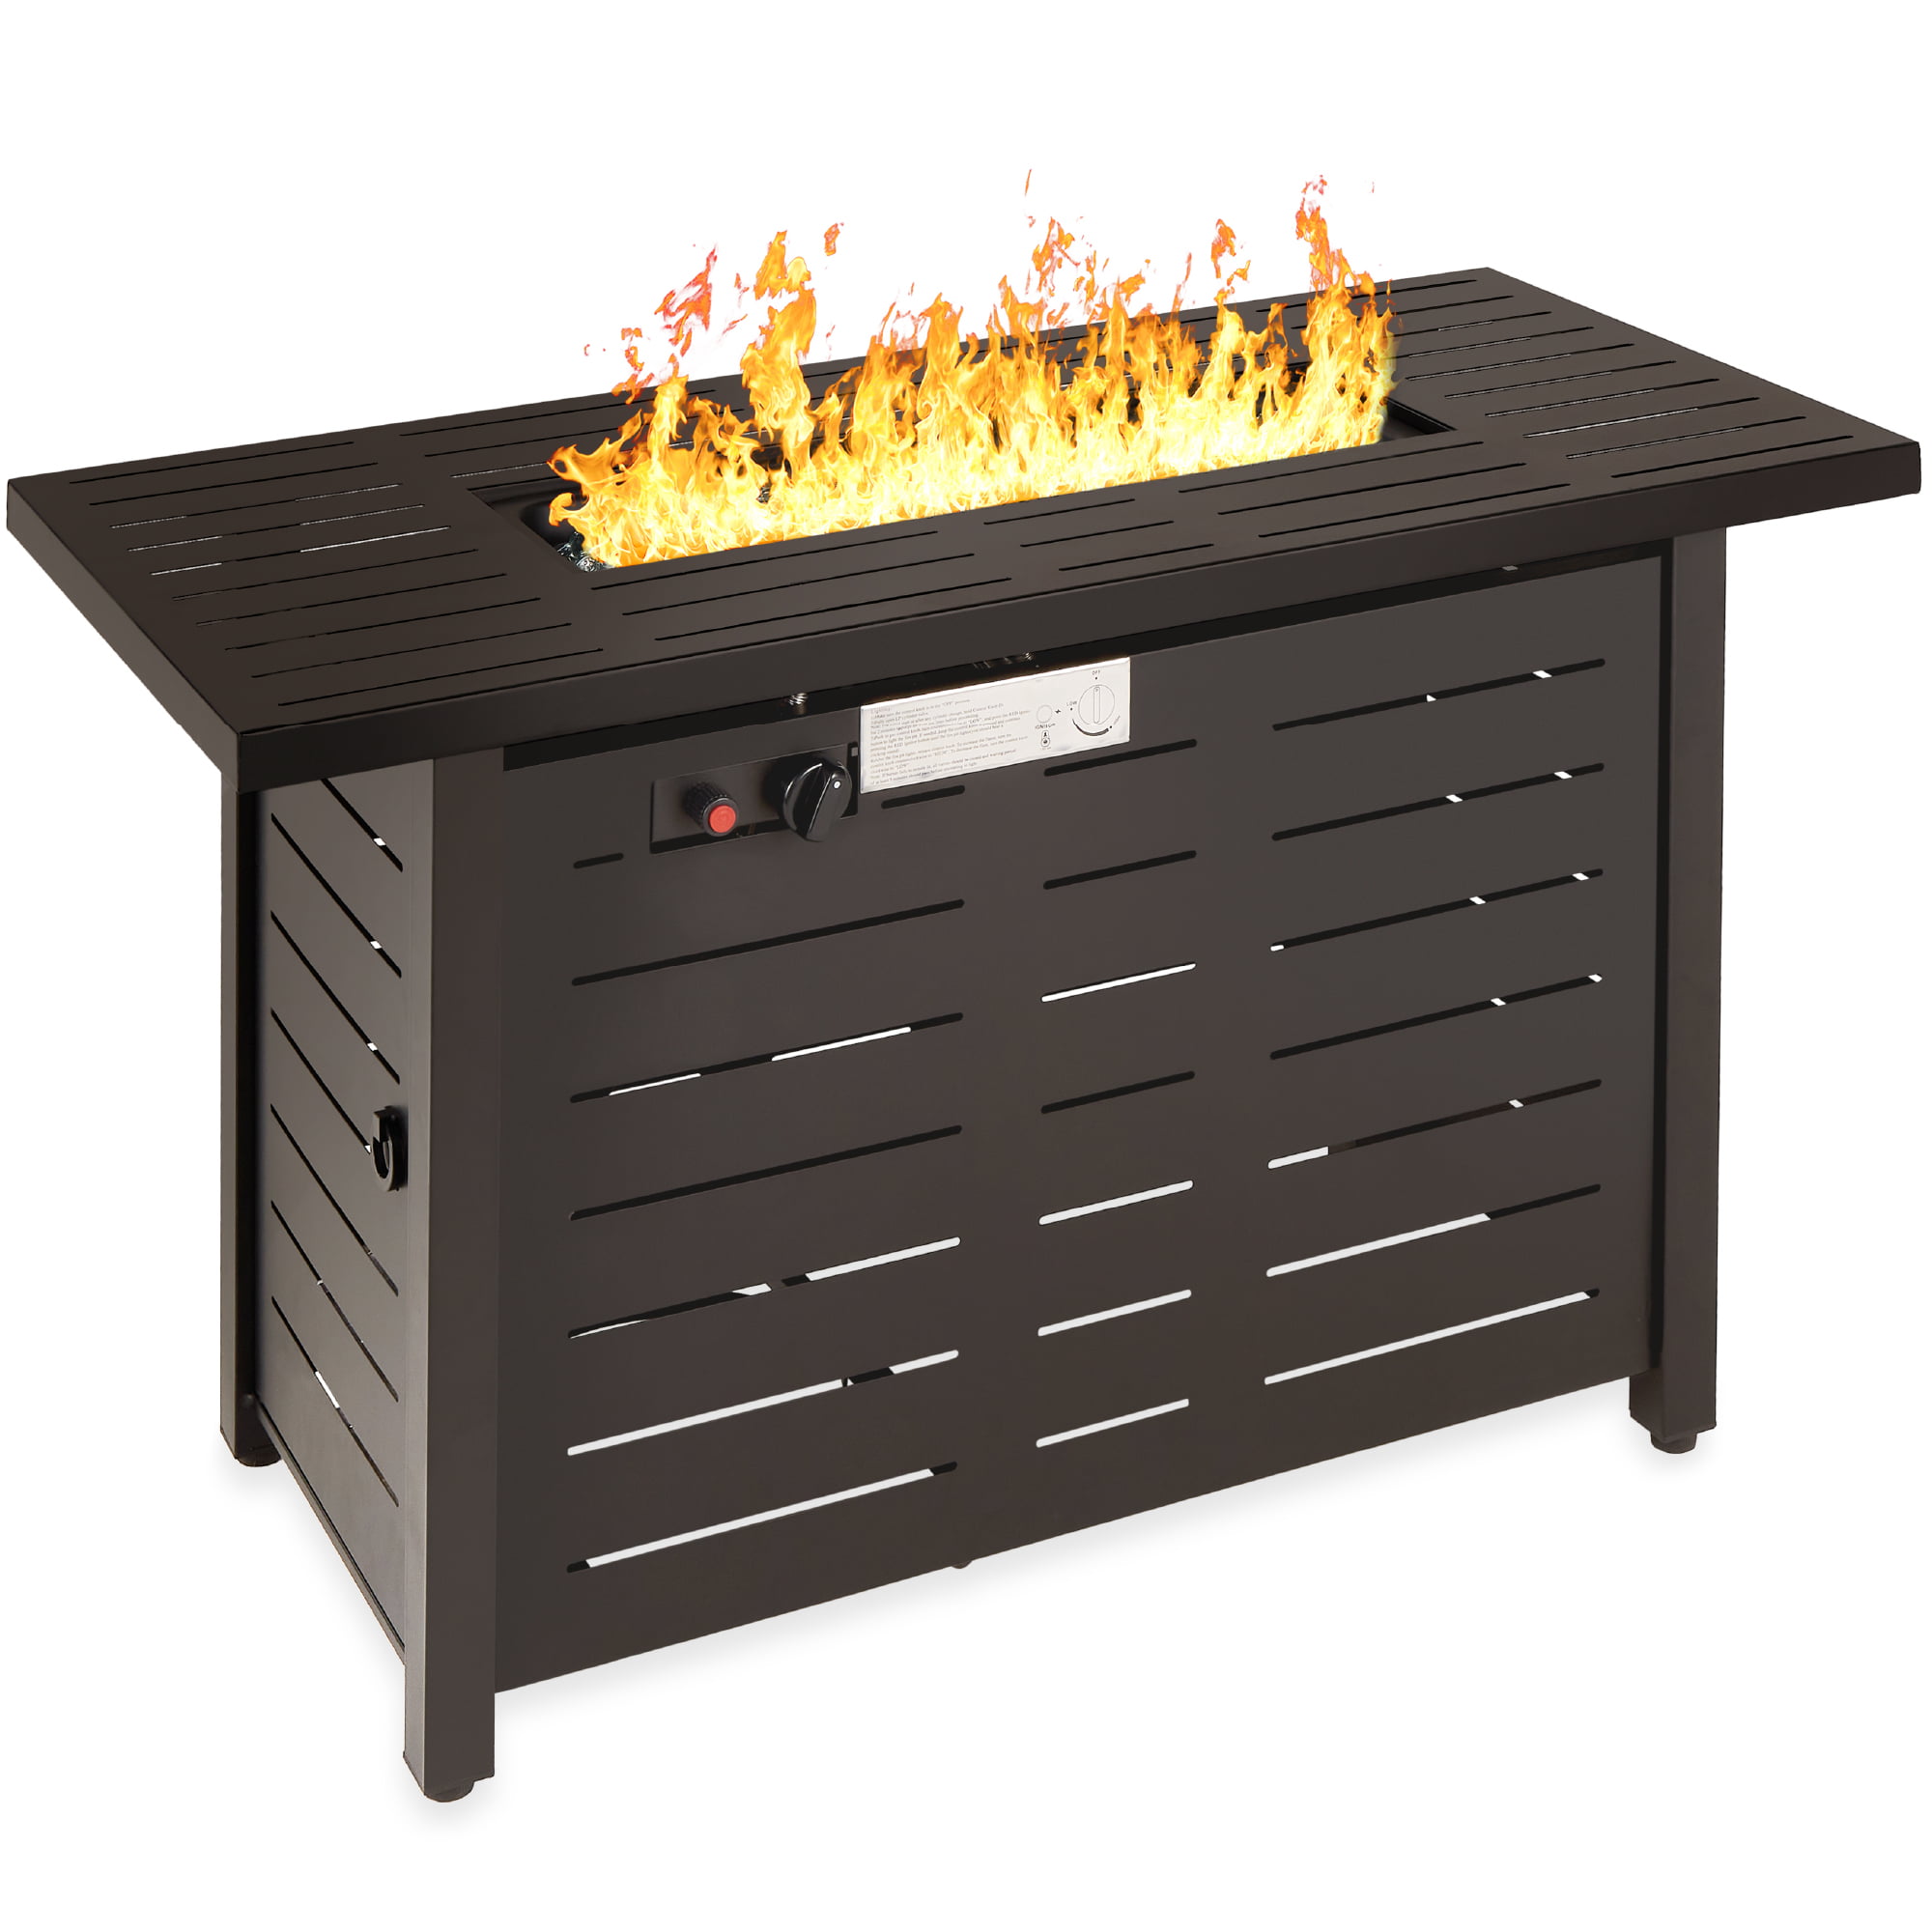 Fire Pit Table, Best Gas Fire Pit For Heat